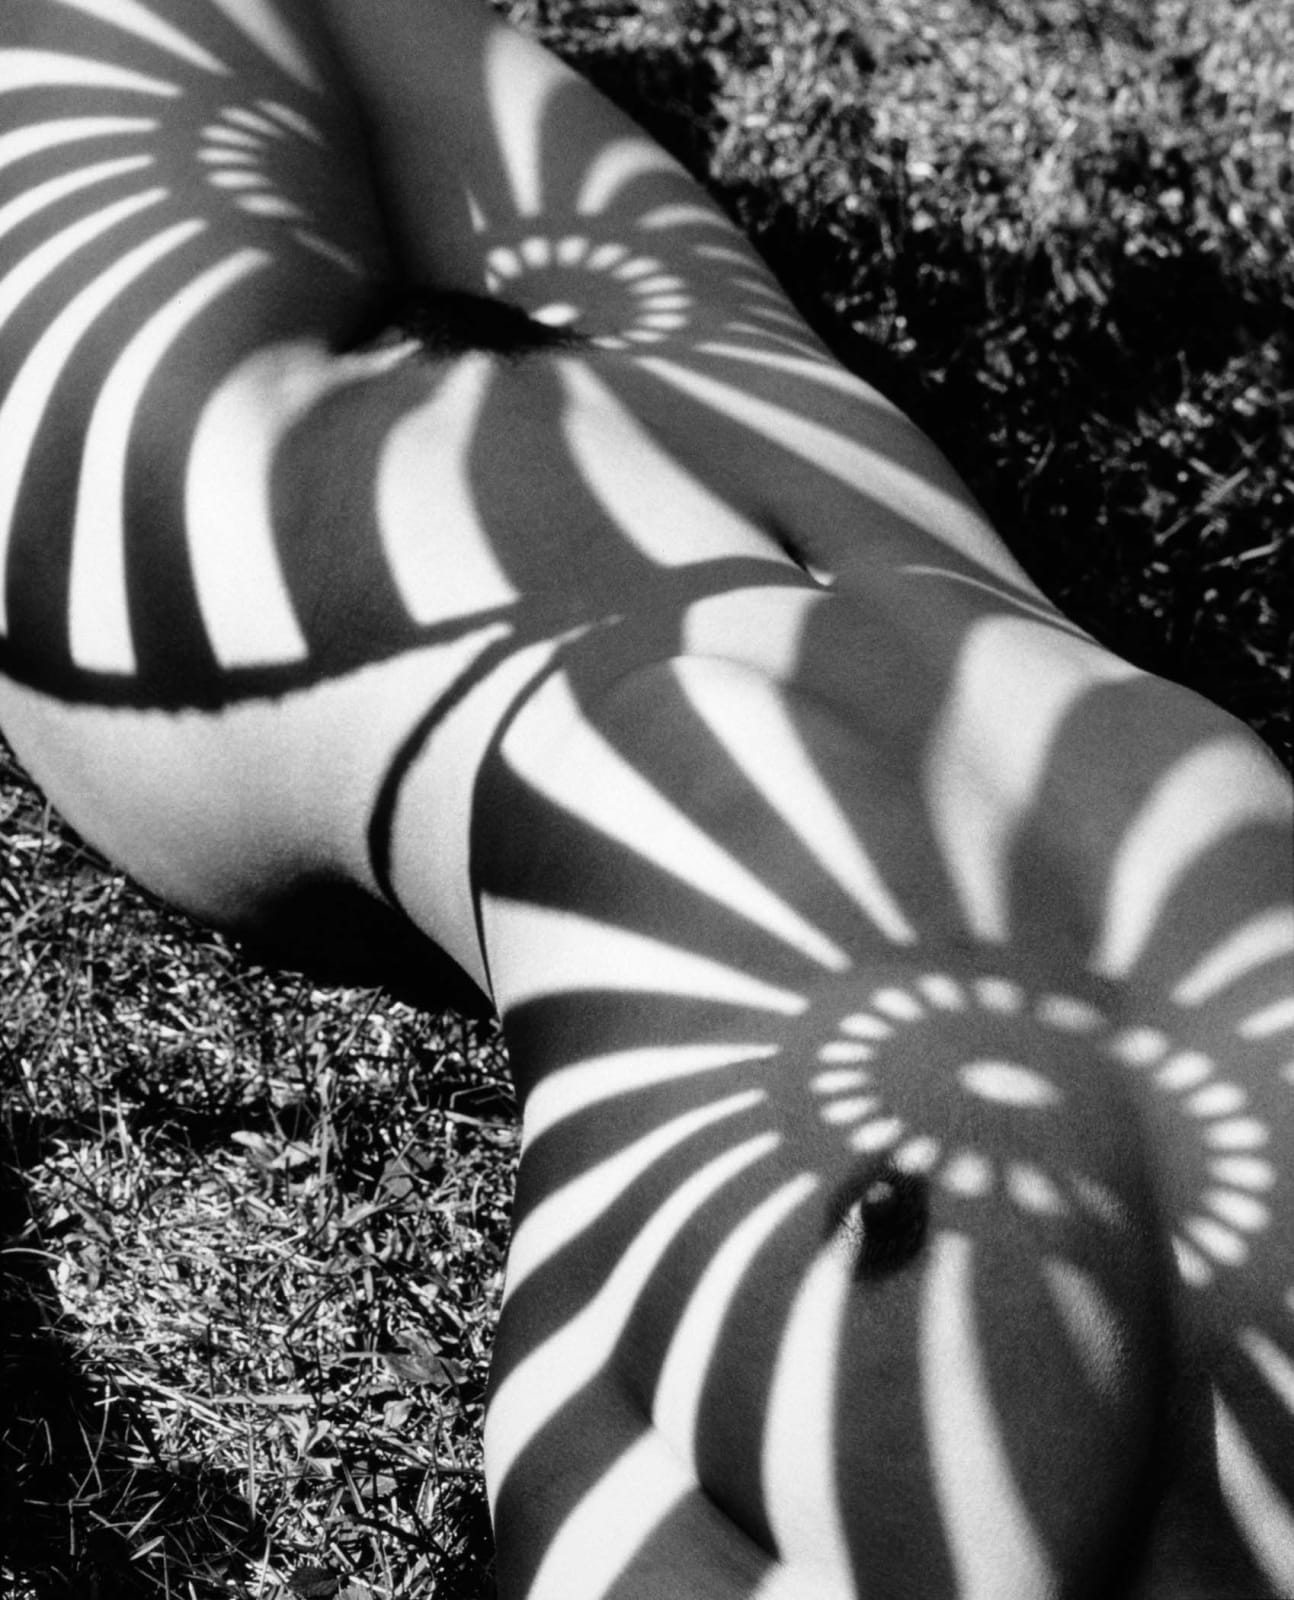 Herb Ritts, Neith with Shadows (Front), Poundridge, 1985